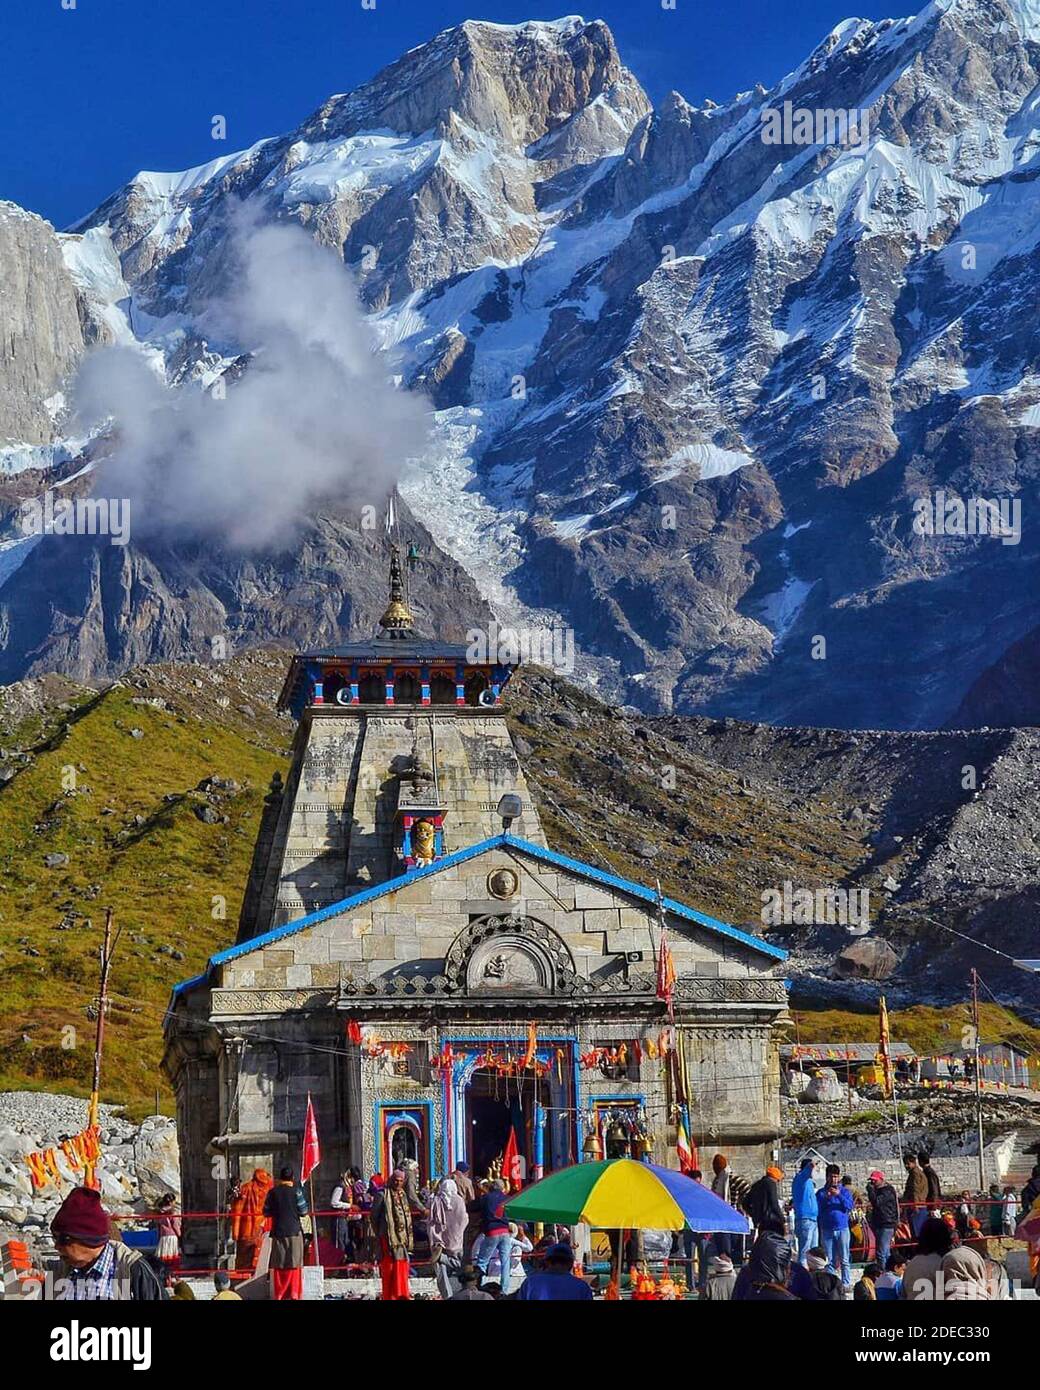 Featured image of post Kedarnath Wallpaper Hd : Download hd wallpapers 1080p from wallpaperfx, download full high definition wallpapers at 1920x1080 size.